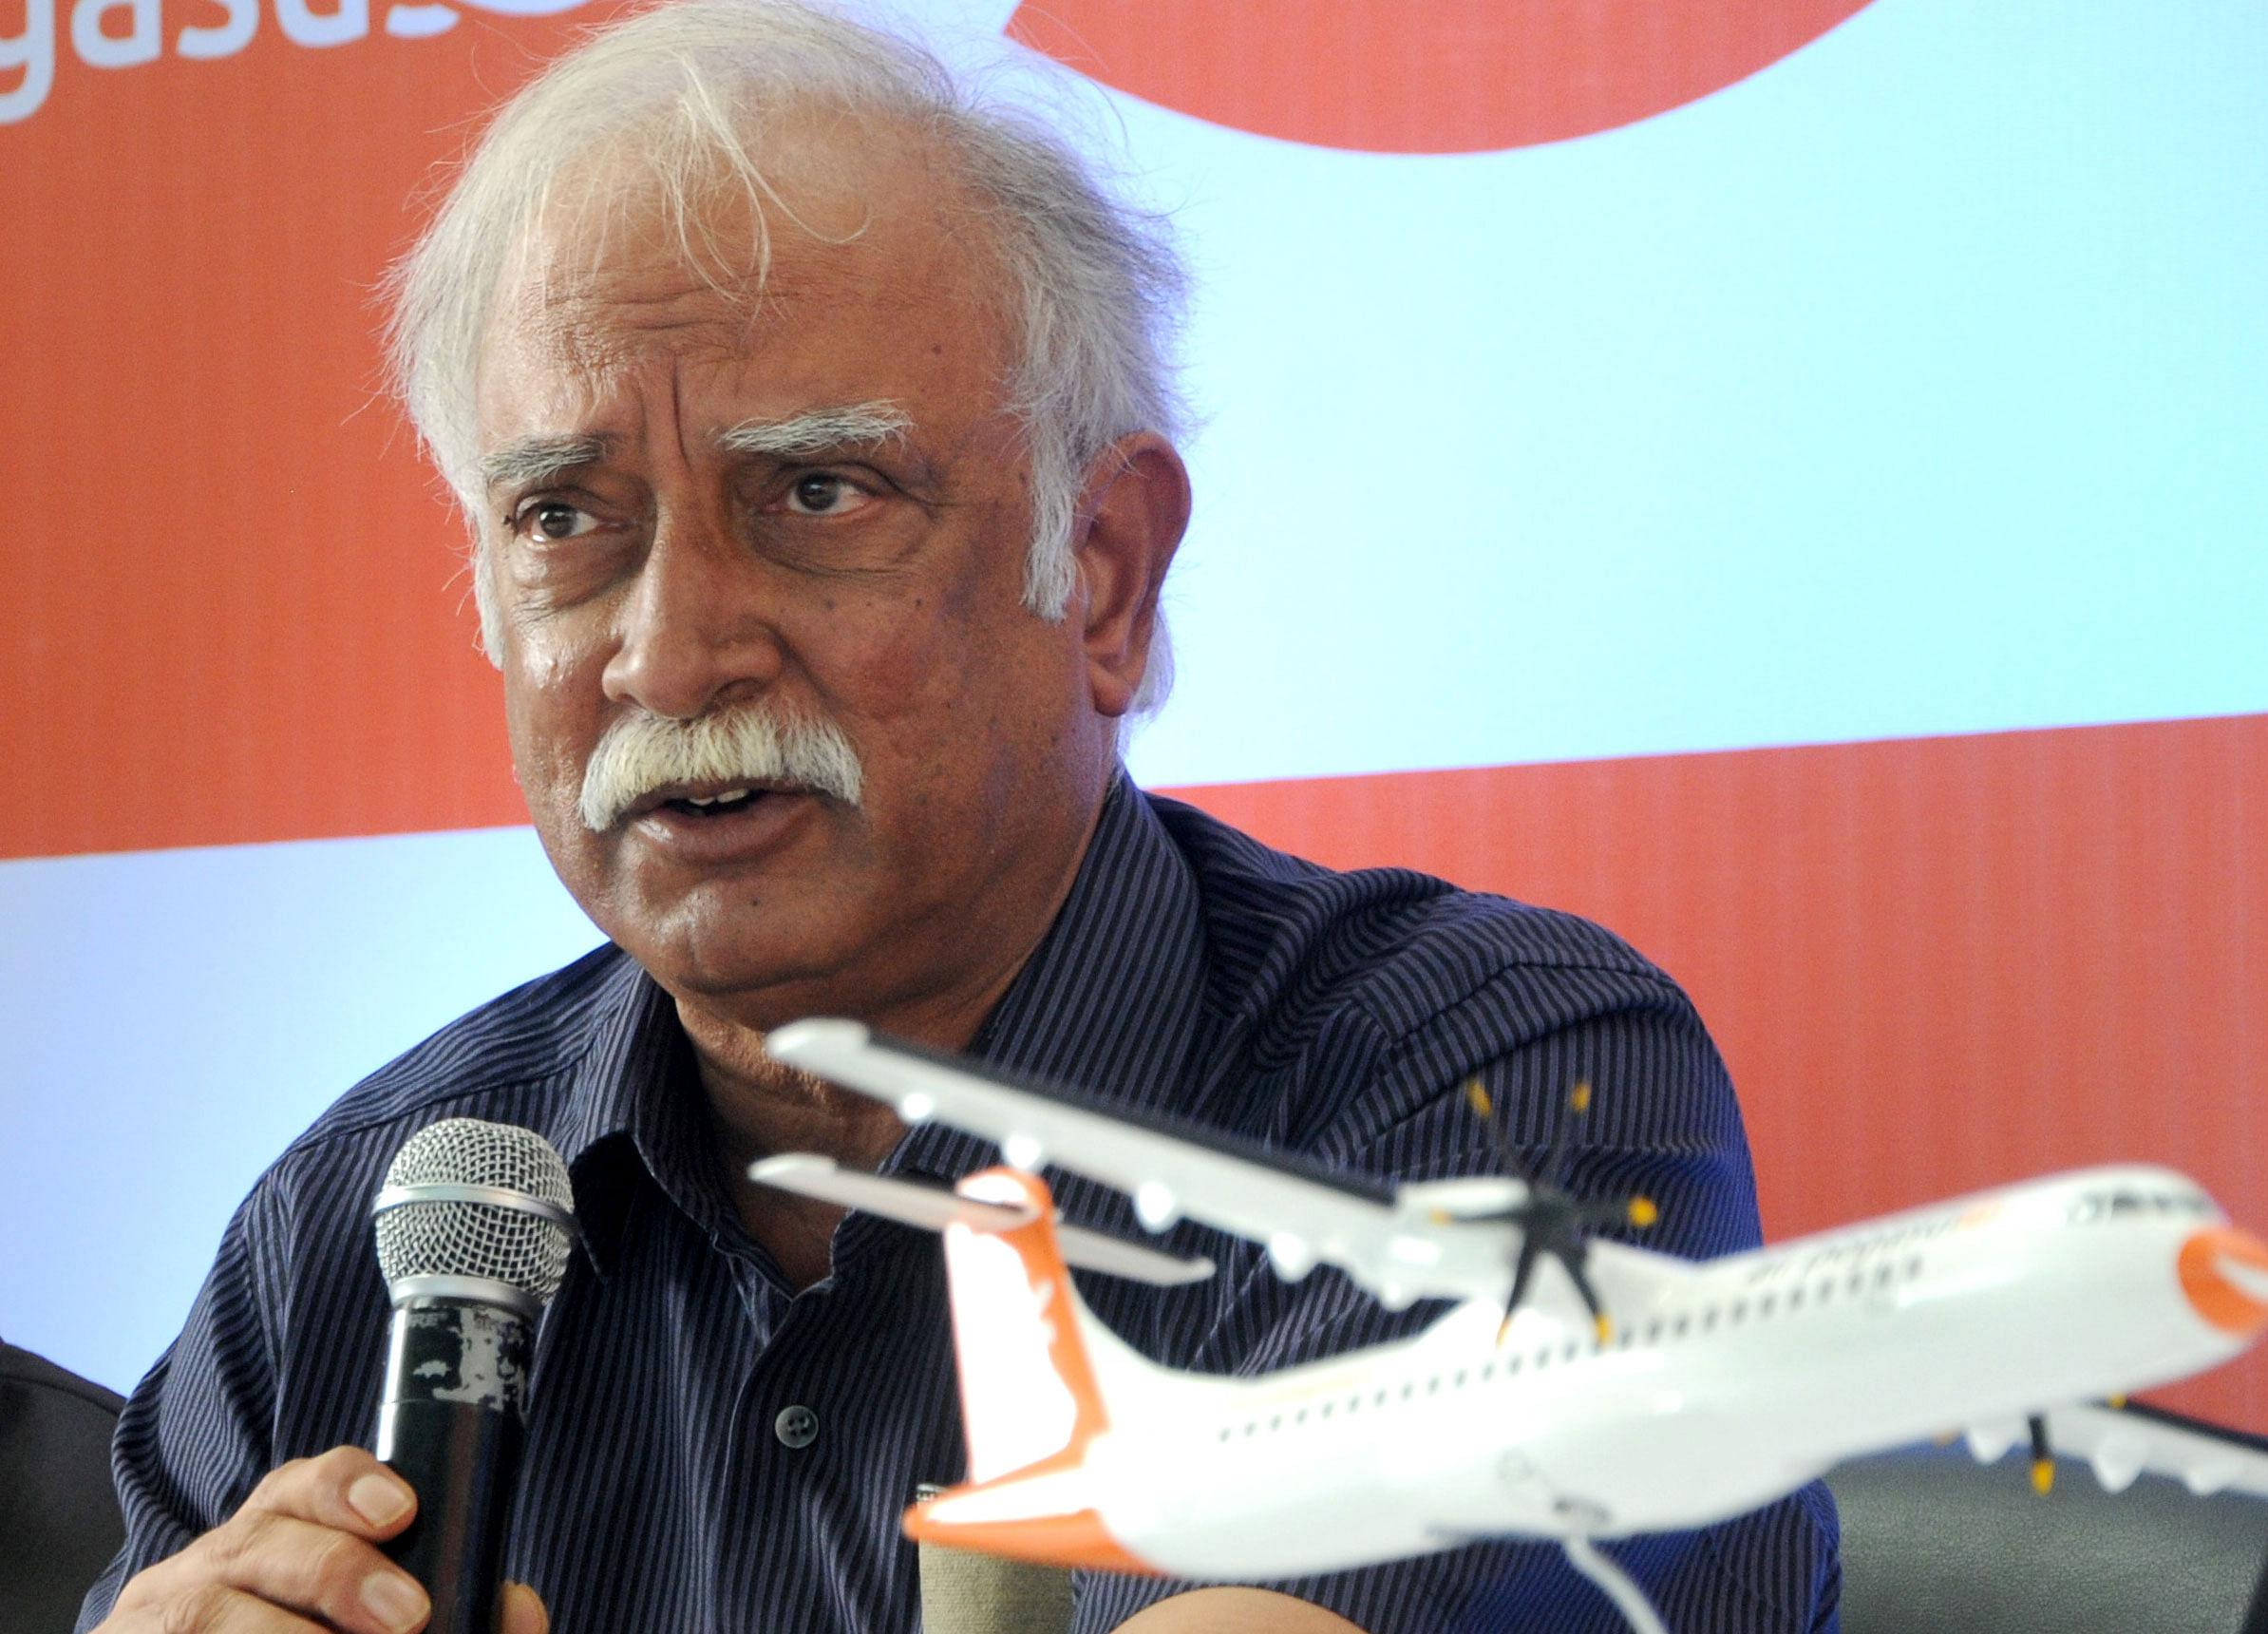 Civil Aviation Minister Ashok Gajapathi Raju said restricting the airfares will not make good business sense as it could also jeopardise the government's regional connectivity plan as such a move may discourage airlines to fly on non-profitable routes. DH File Photo